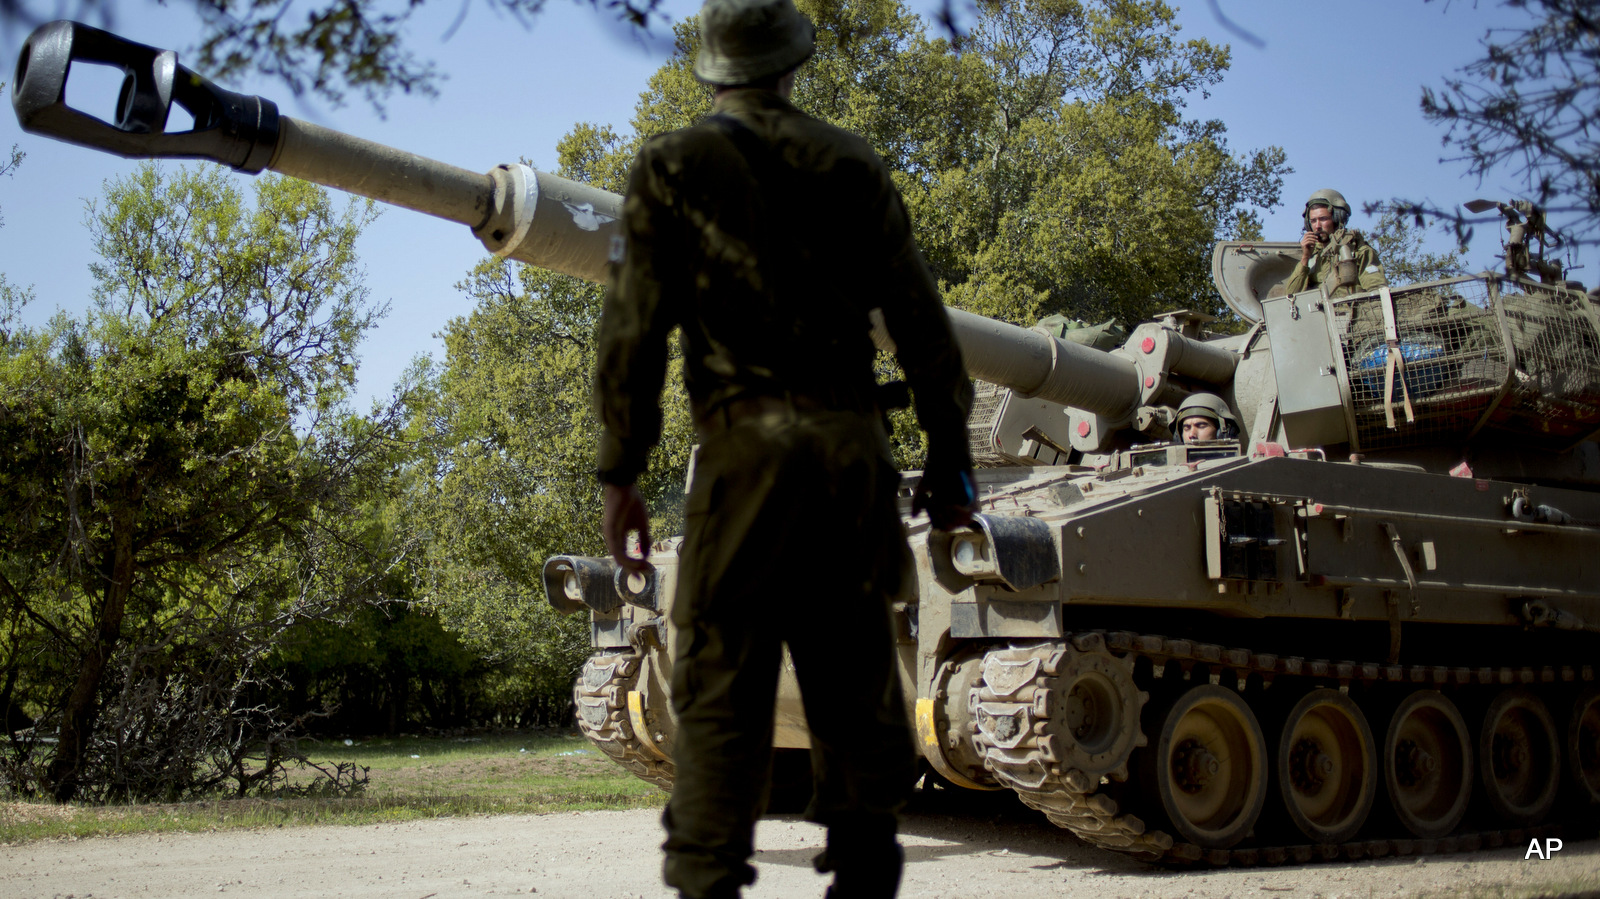 An Israeli soldier looks at a mobile artillery unit heading towards a position near the border with Syria in the Israeli controlled Golan Heights, Monday, April 27, 2015. (AP/Ariel Schalit)